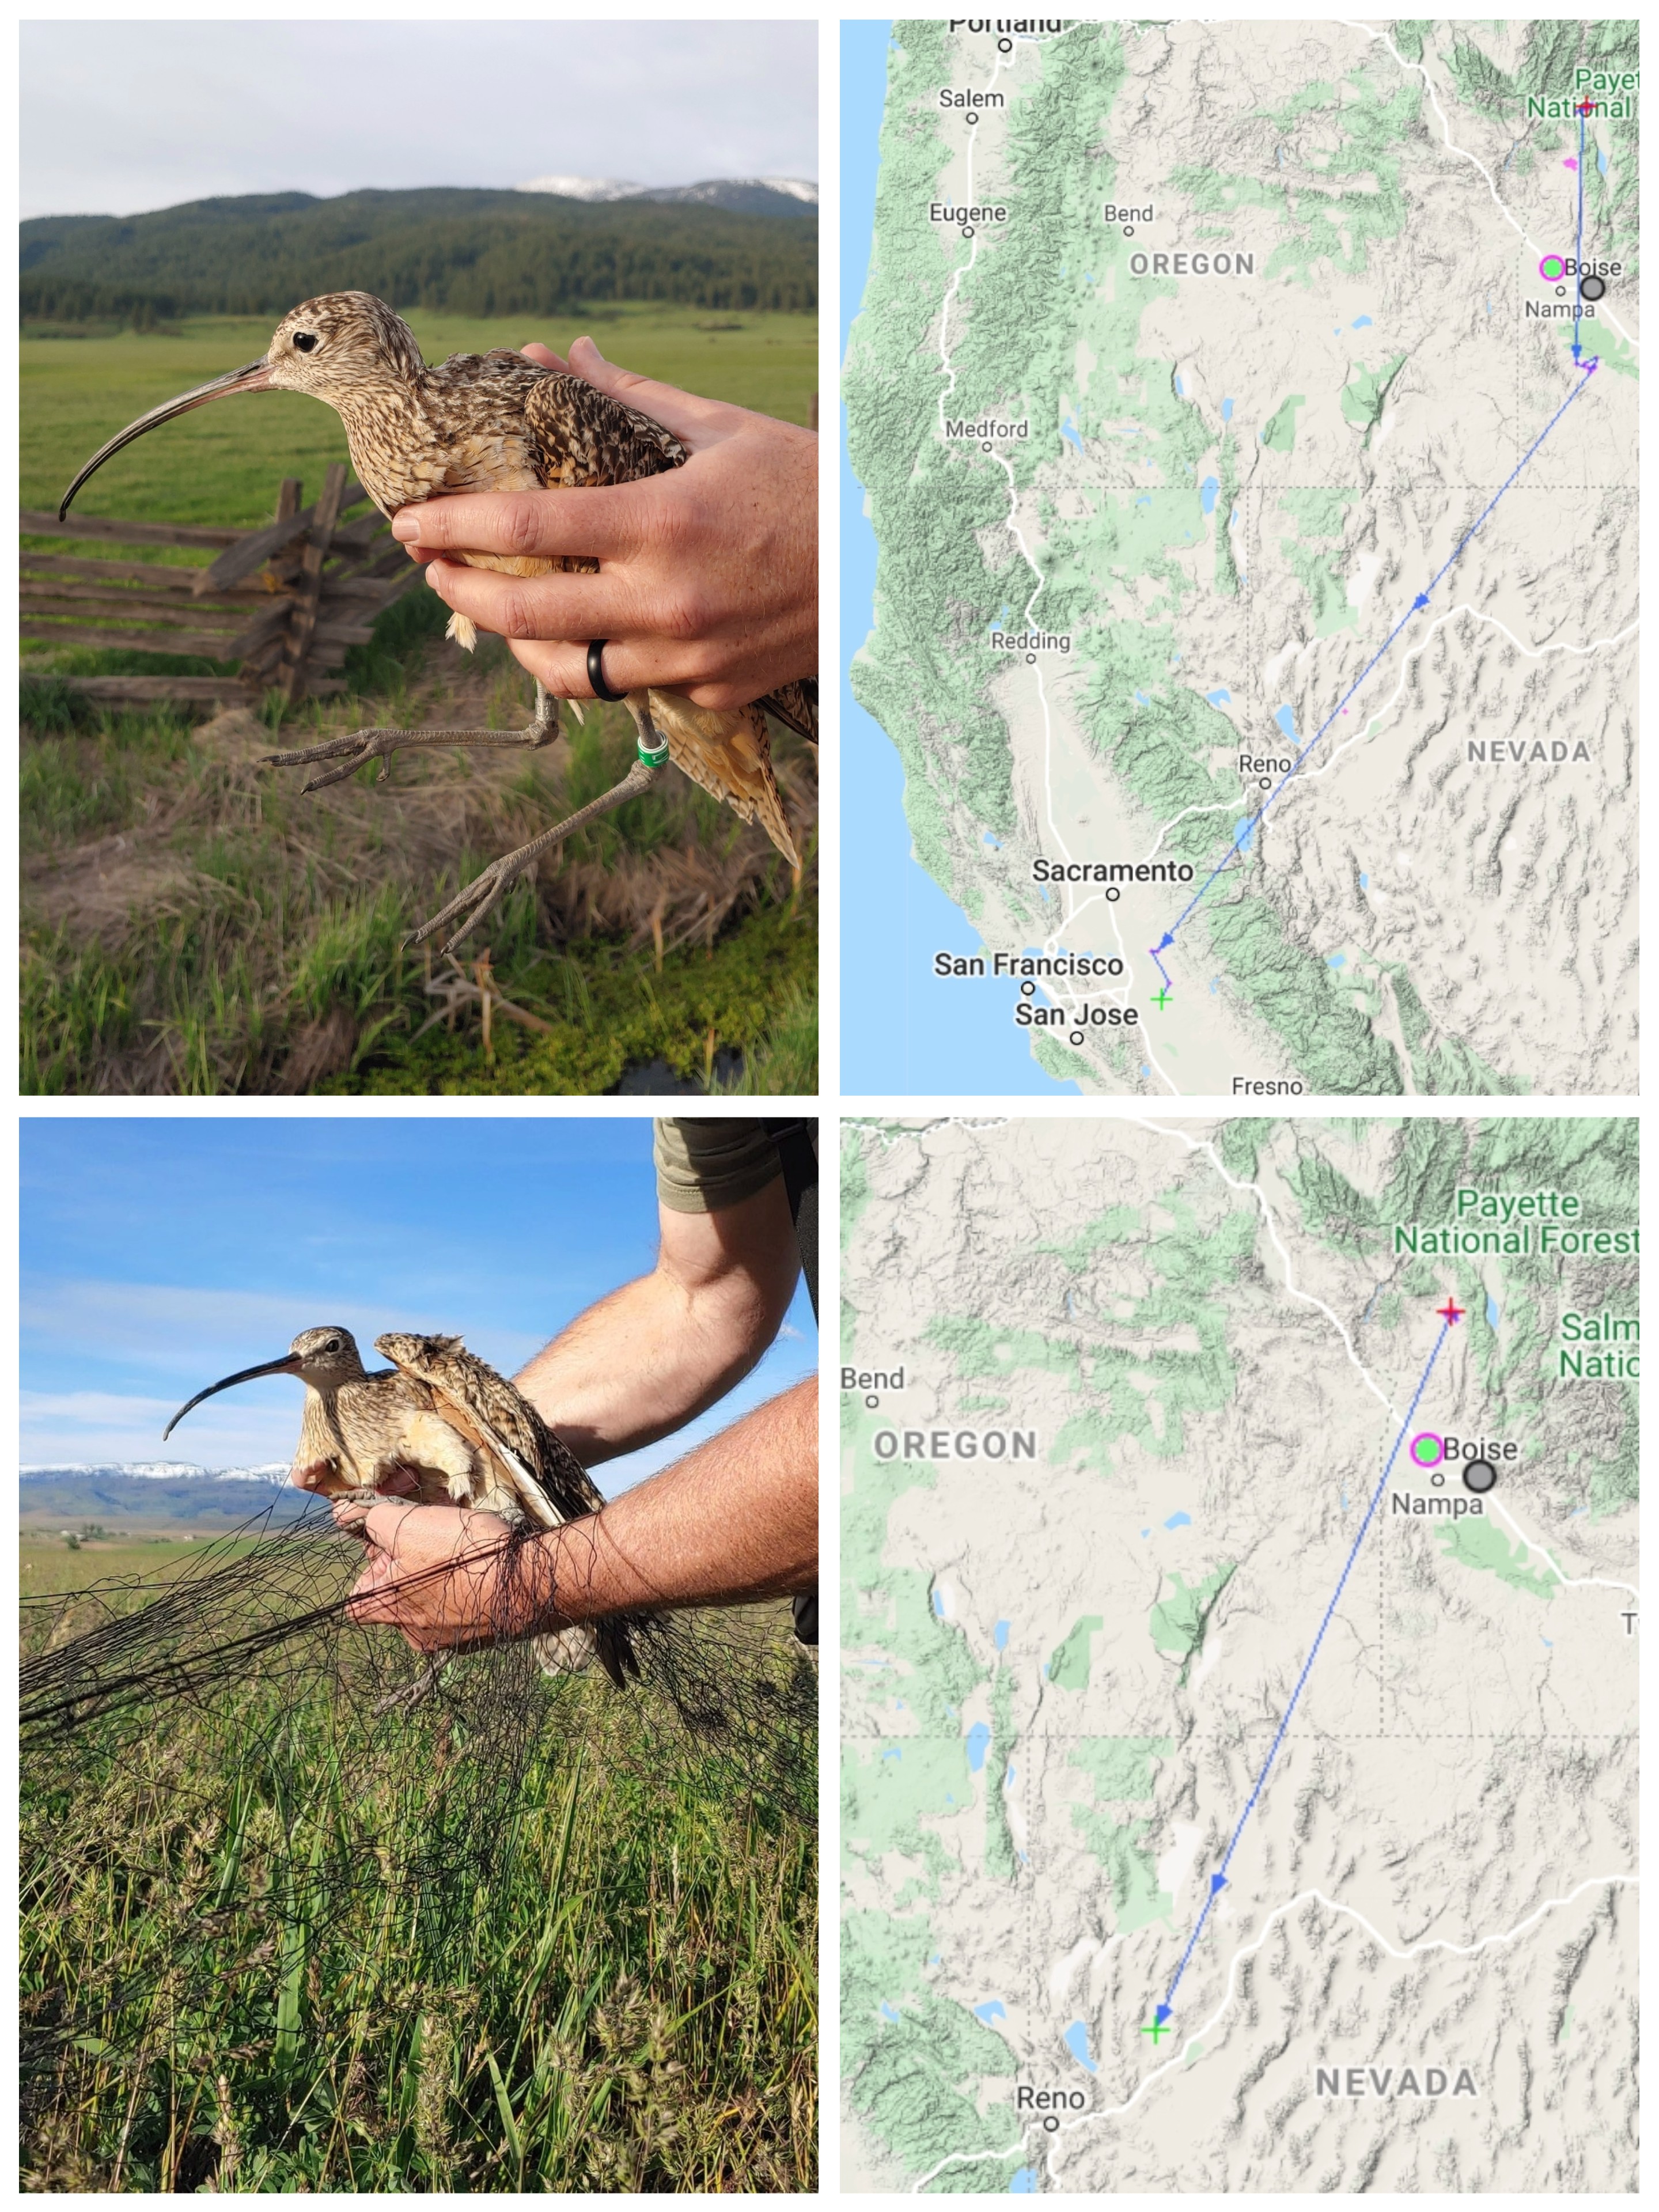 photo collage of two curlews next to the map of their respective movements. The top curlew, Neil's, map shows a journey from Idaho to the central valley of California. Dozer's map shows a journey from Idaho to a location northeast of Reno, Nevada.